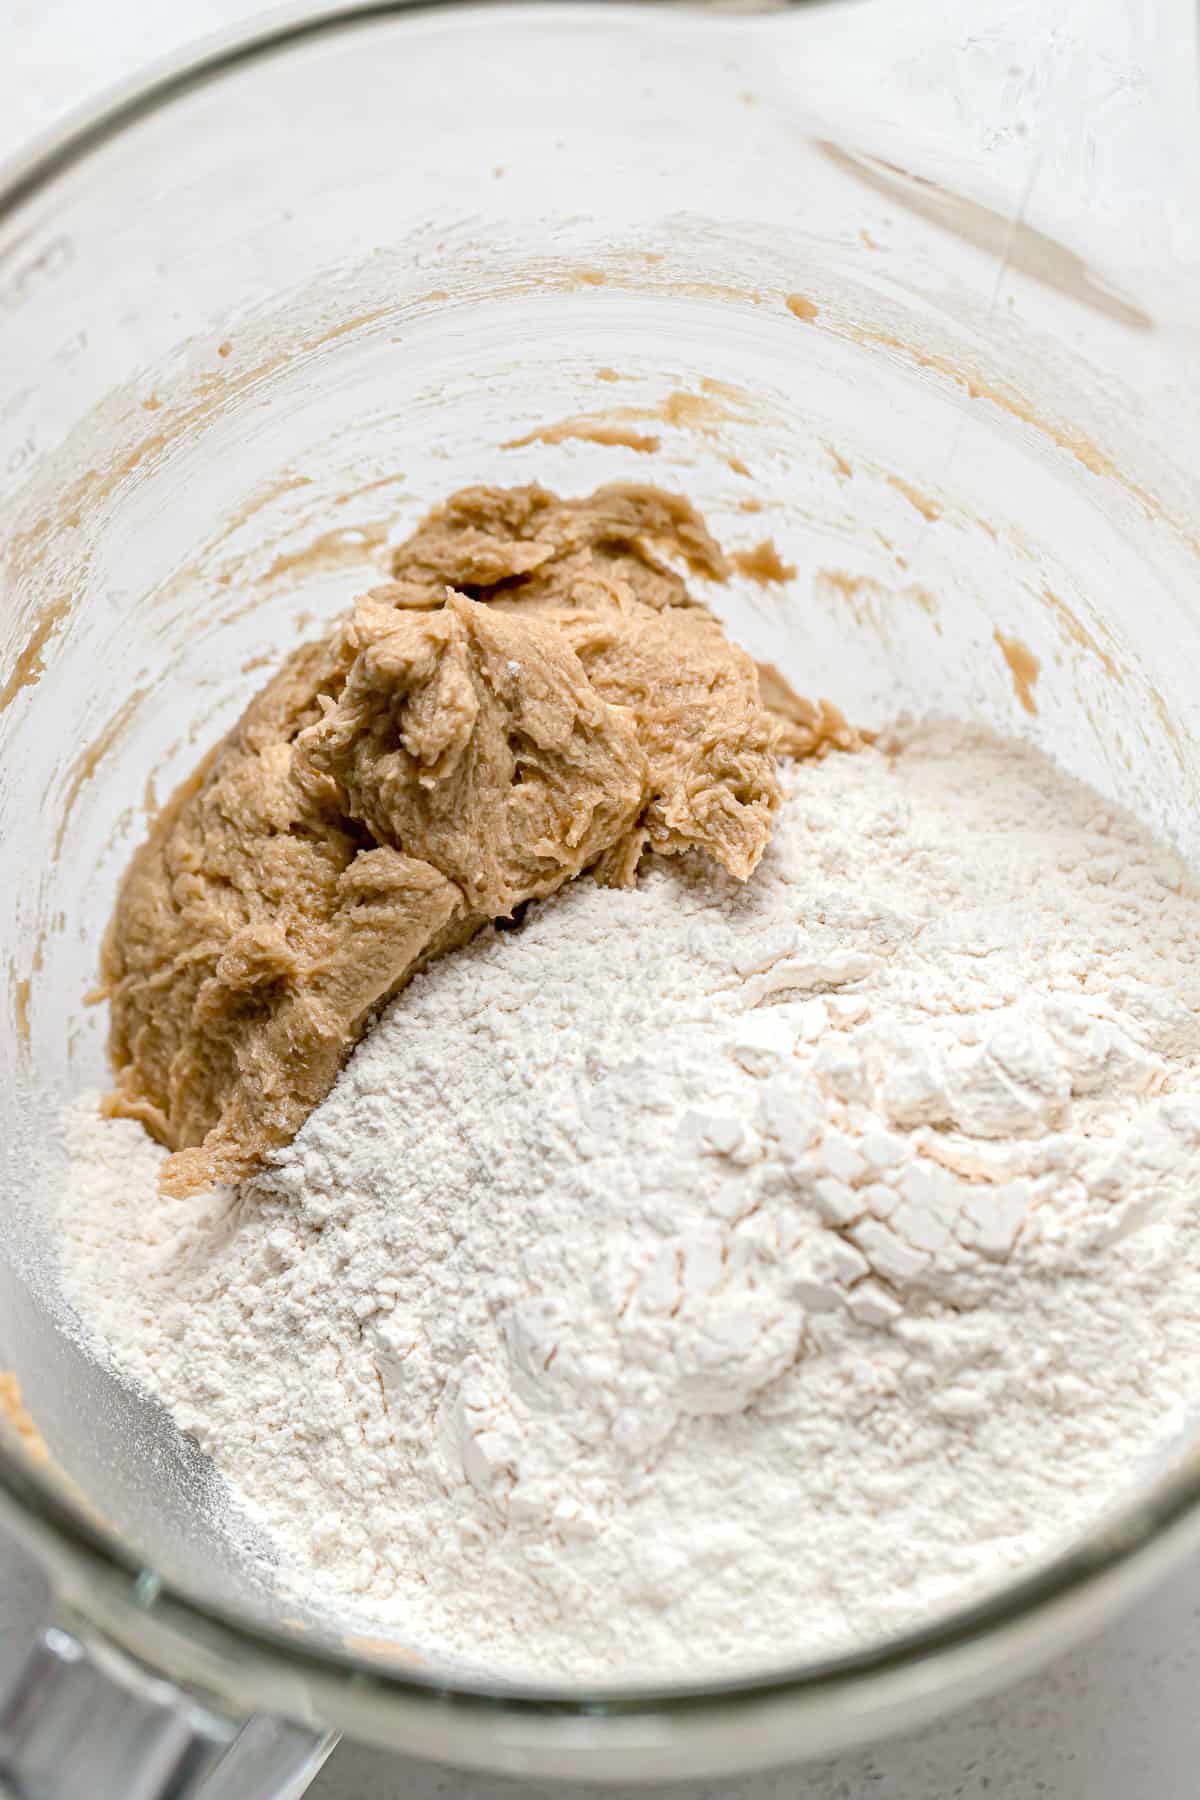 dry ingredients added to dough.